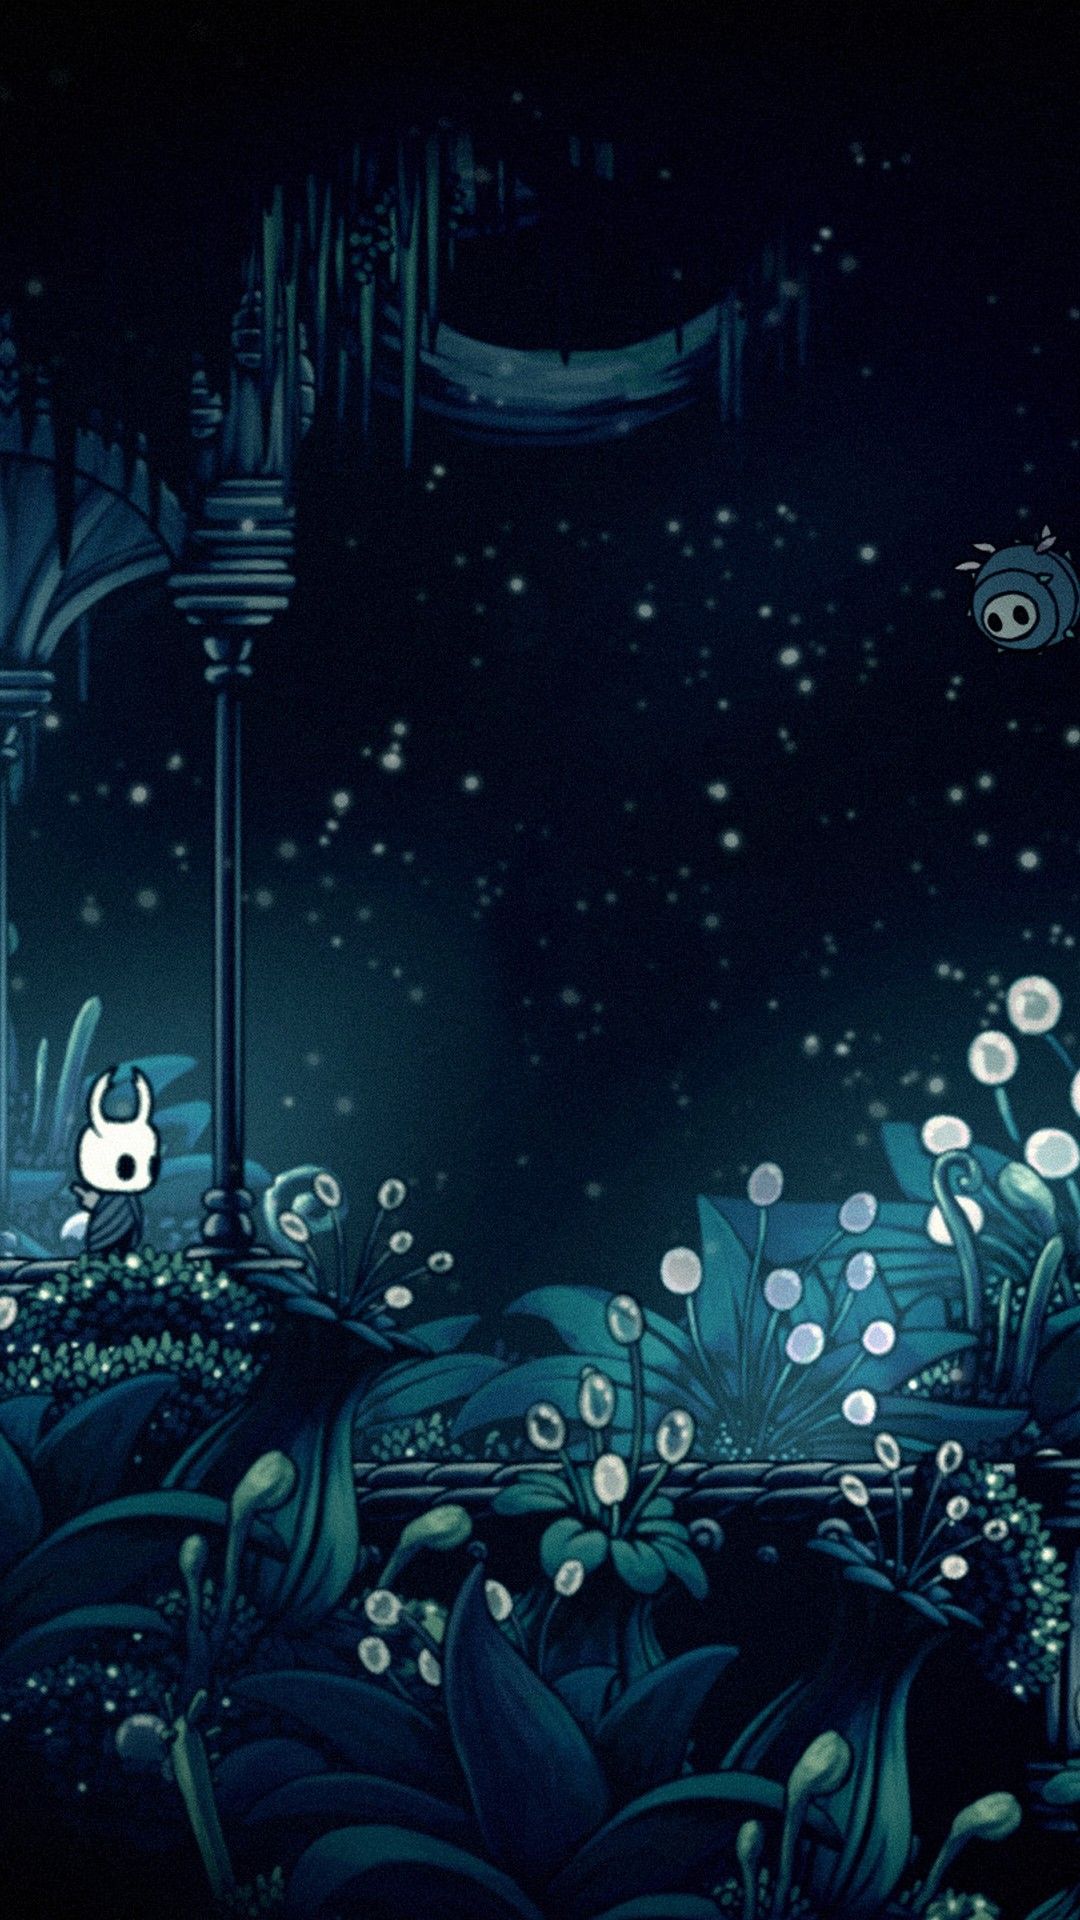 Hollow Knight Wallpapers - Top Hollow Knight Backgrounds